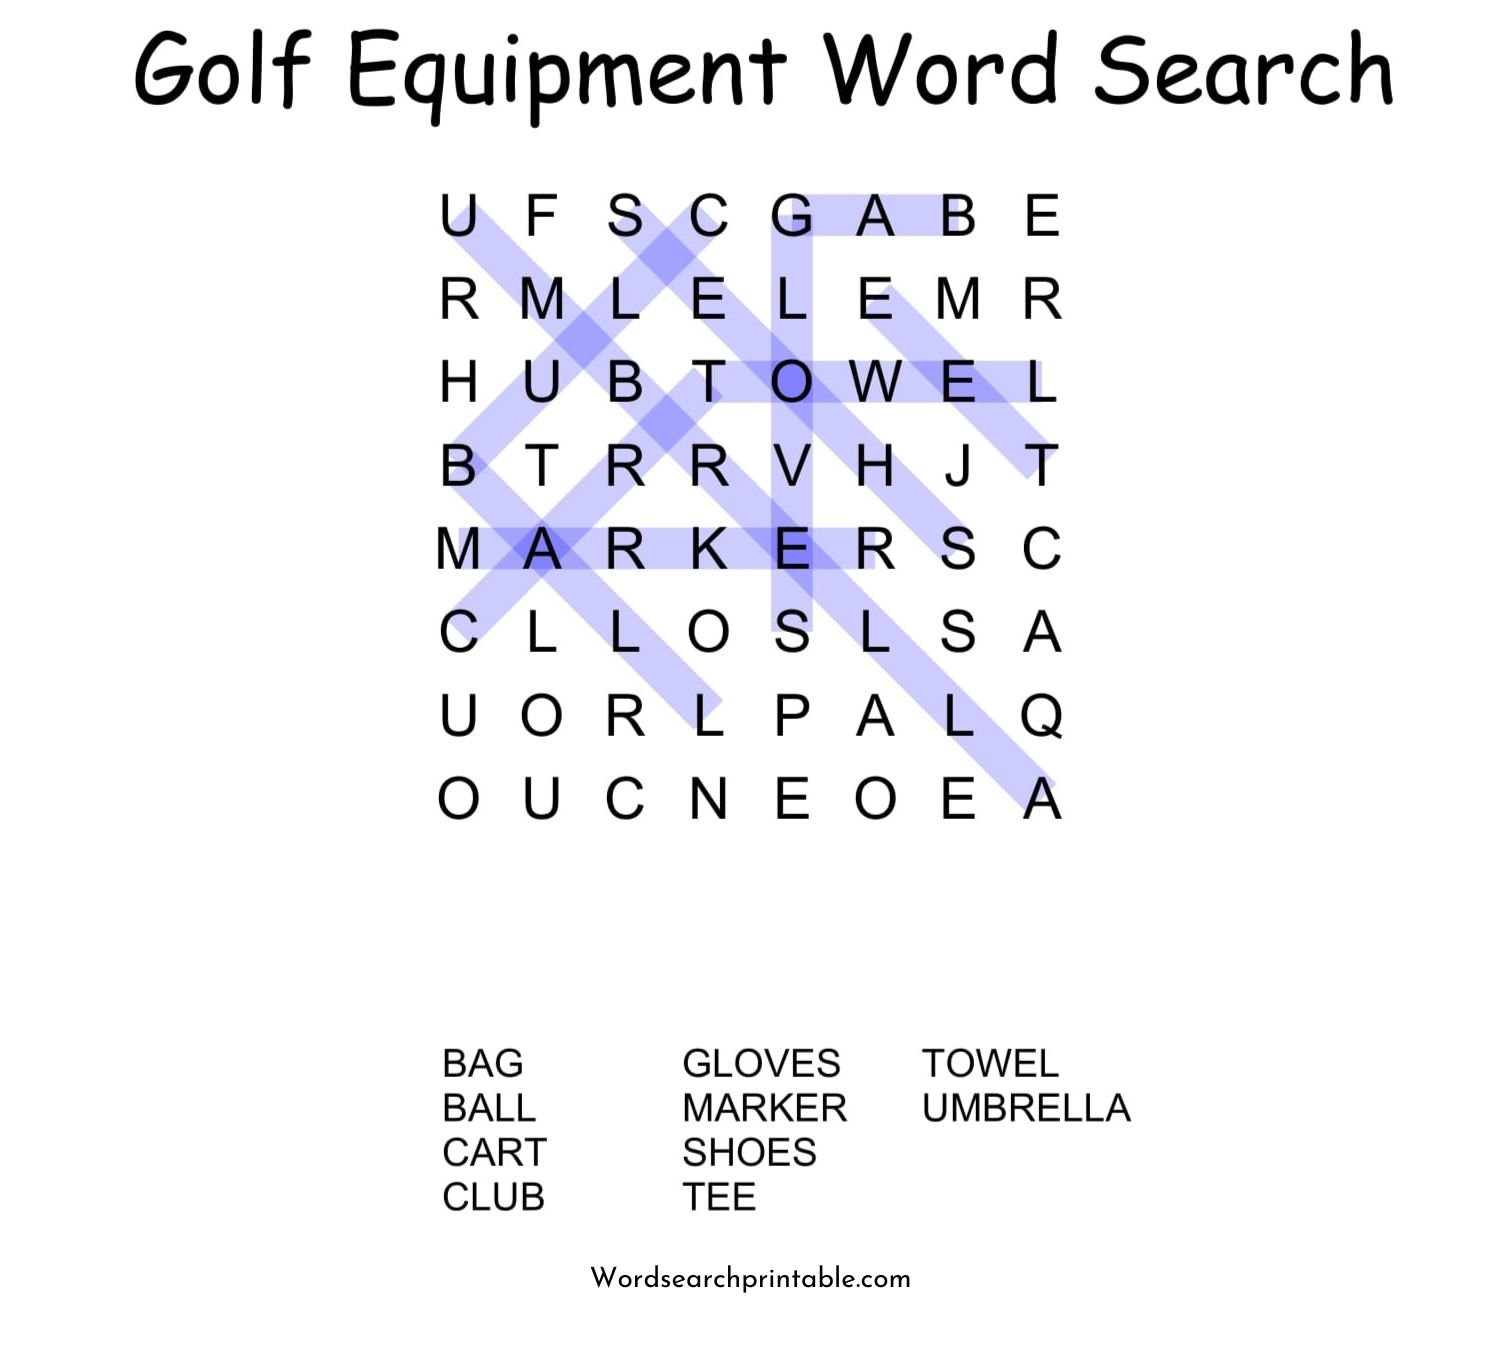 golf equipment word search puzzle solution